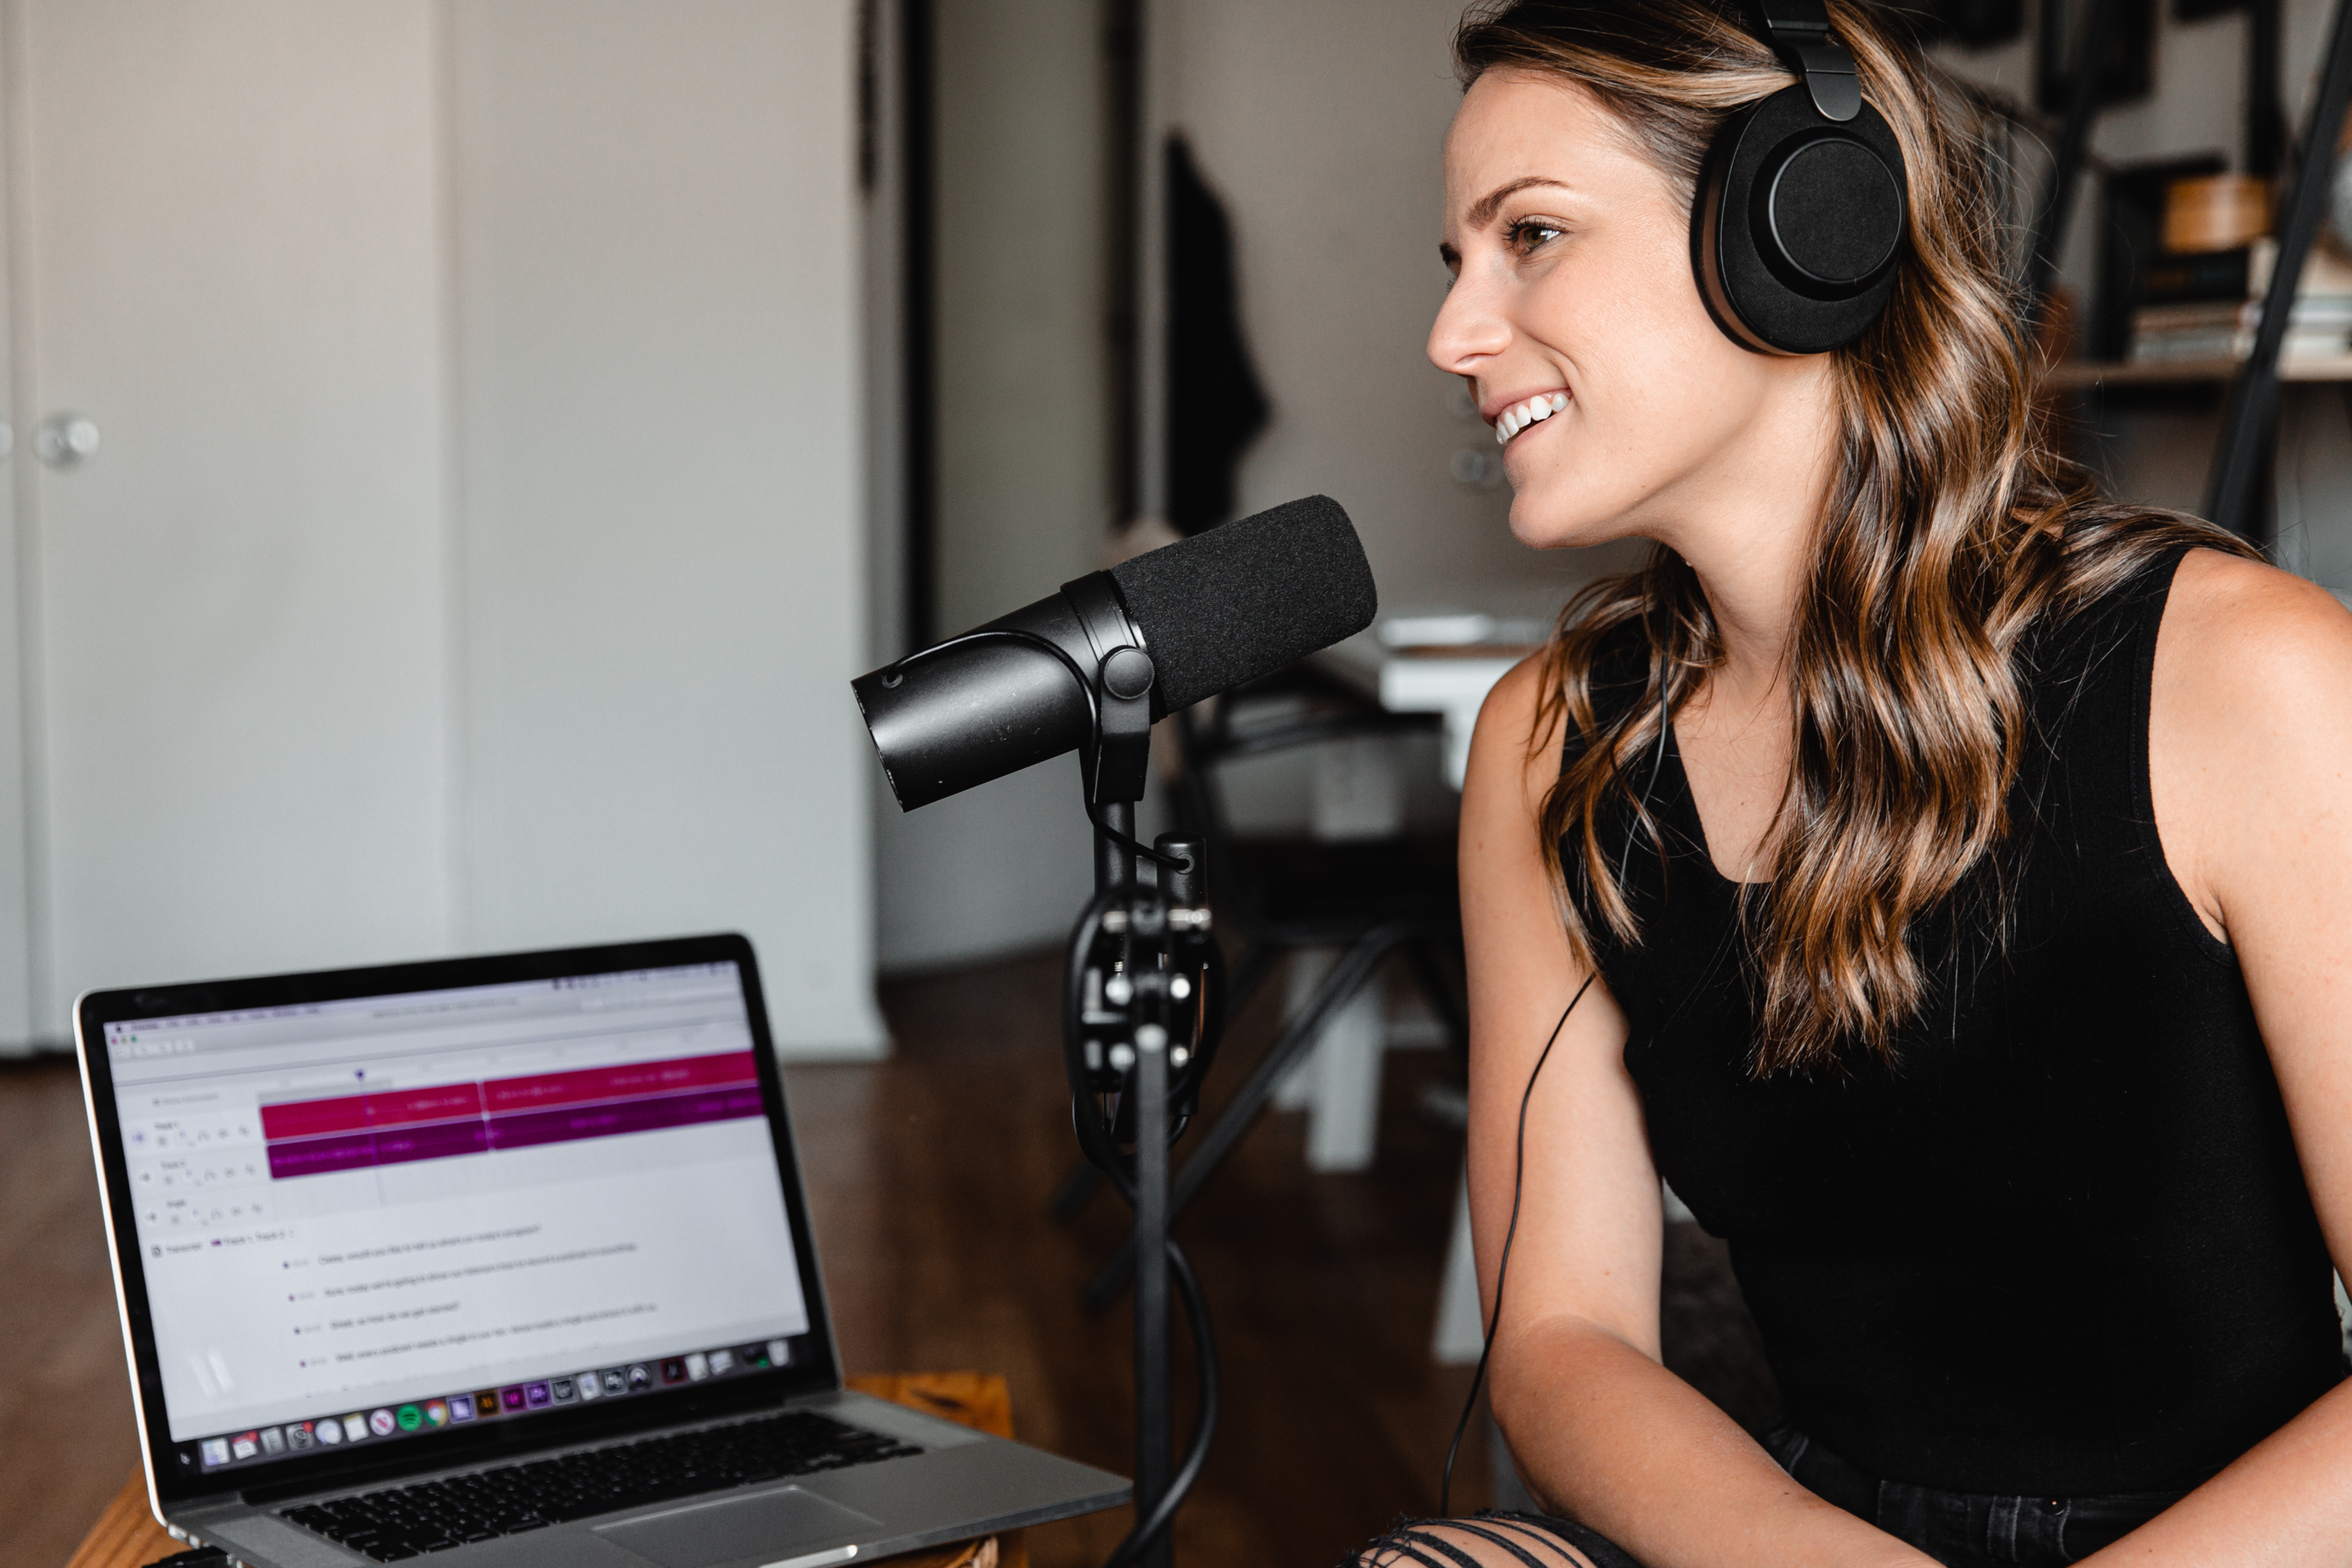 Some brands are turning to podcasts to increase brand awareness and connect with new audiences.